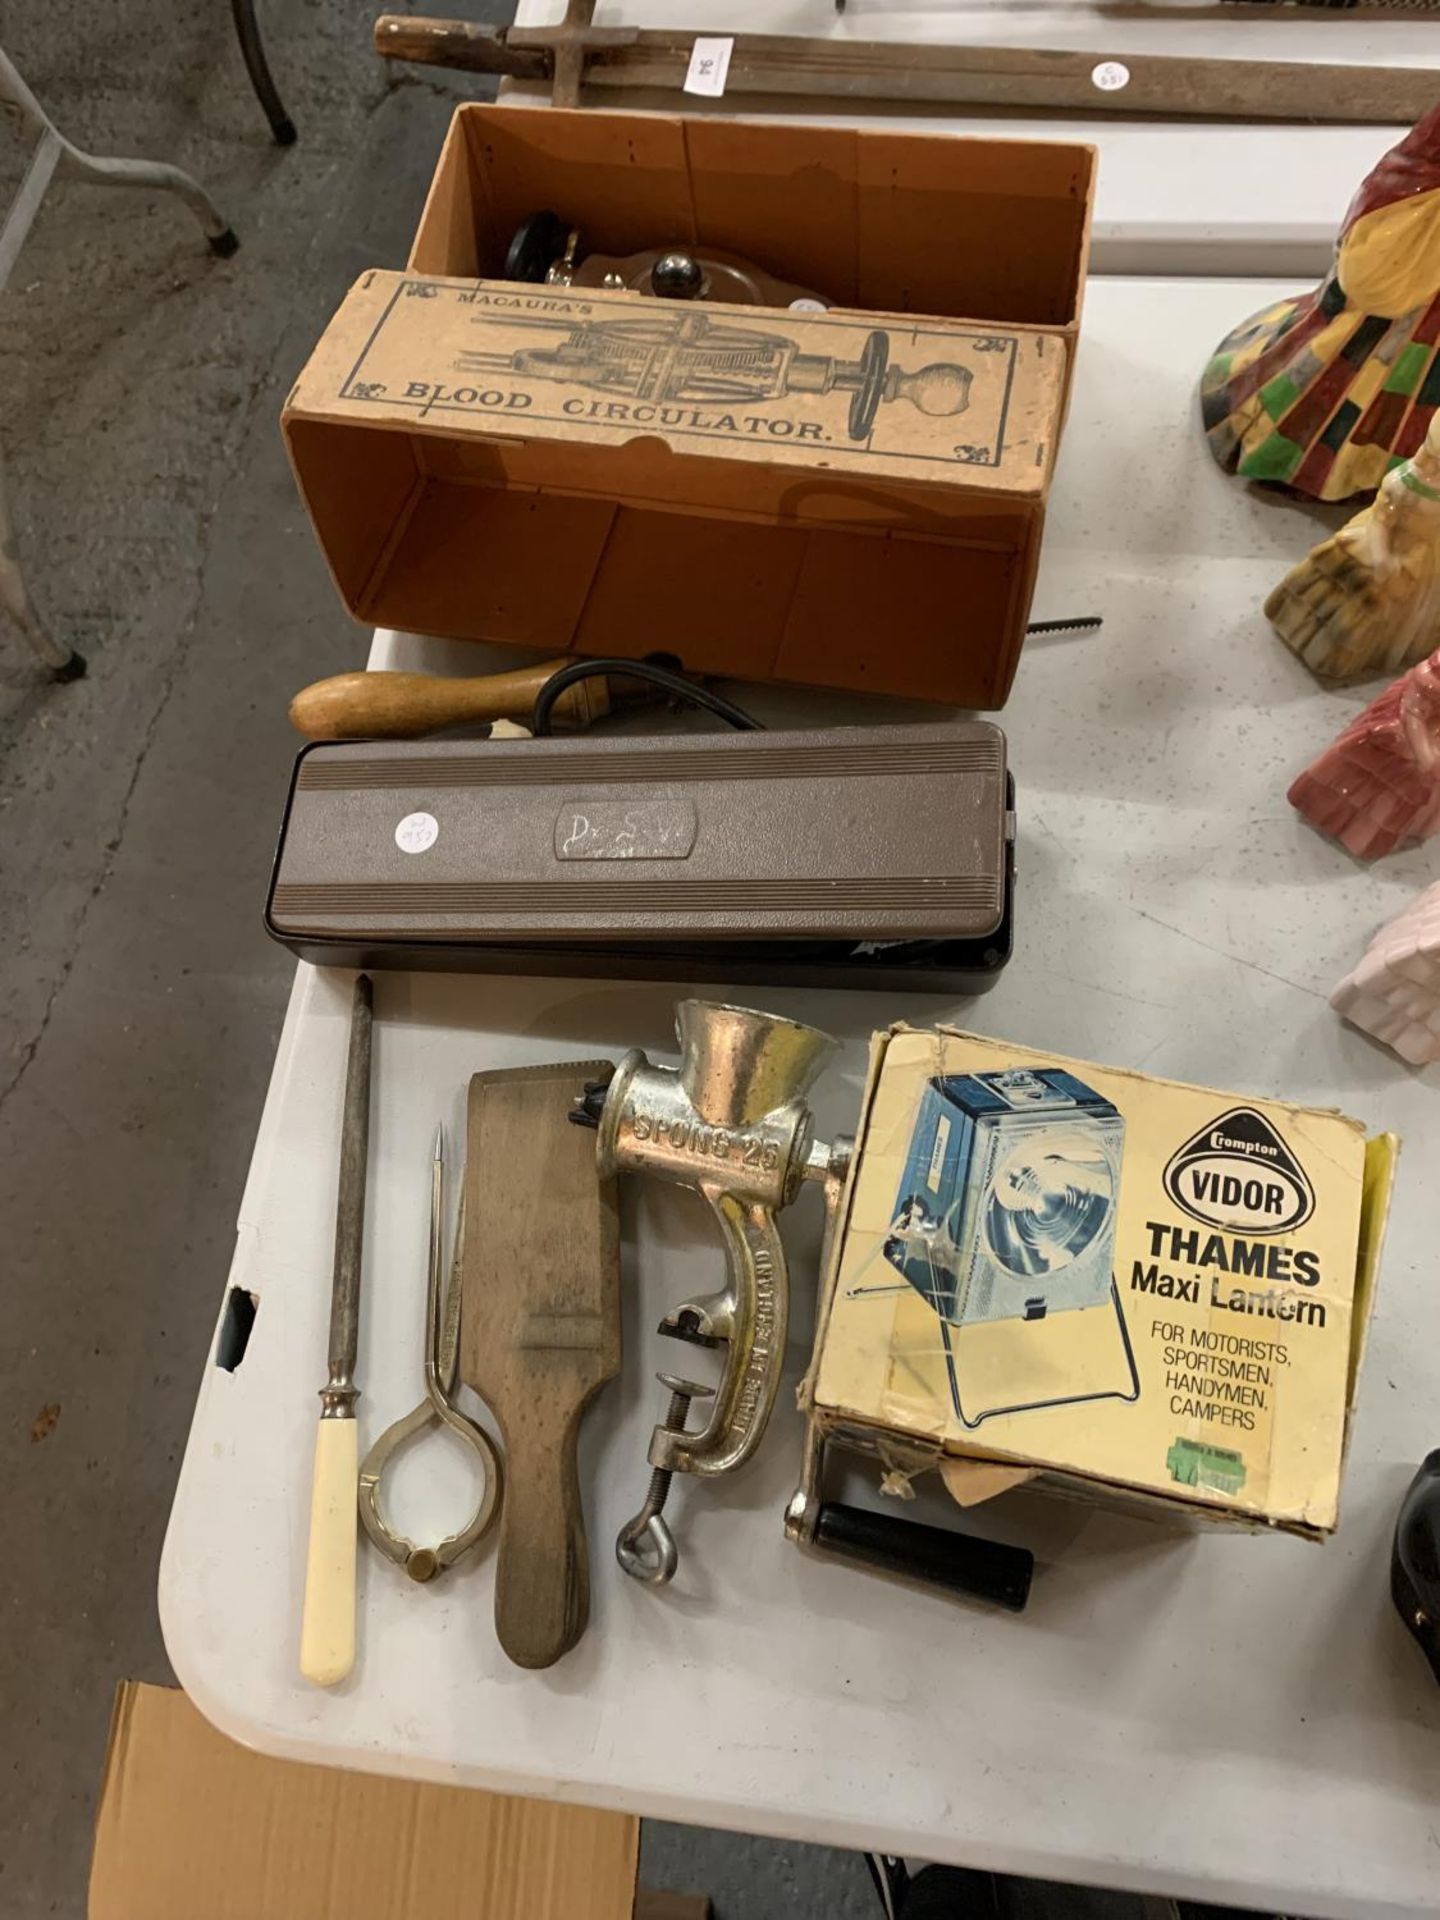 VINTAGE MEDICAL ITEMS TO INCLUDE MACAURA'S BLOOD CIRCULATOR, A BLOOD PRESSURE MACHINE, BUTTER